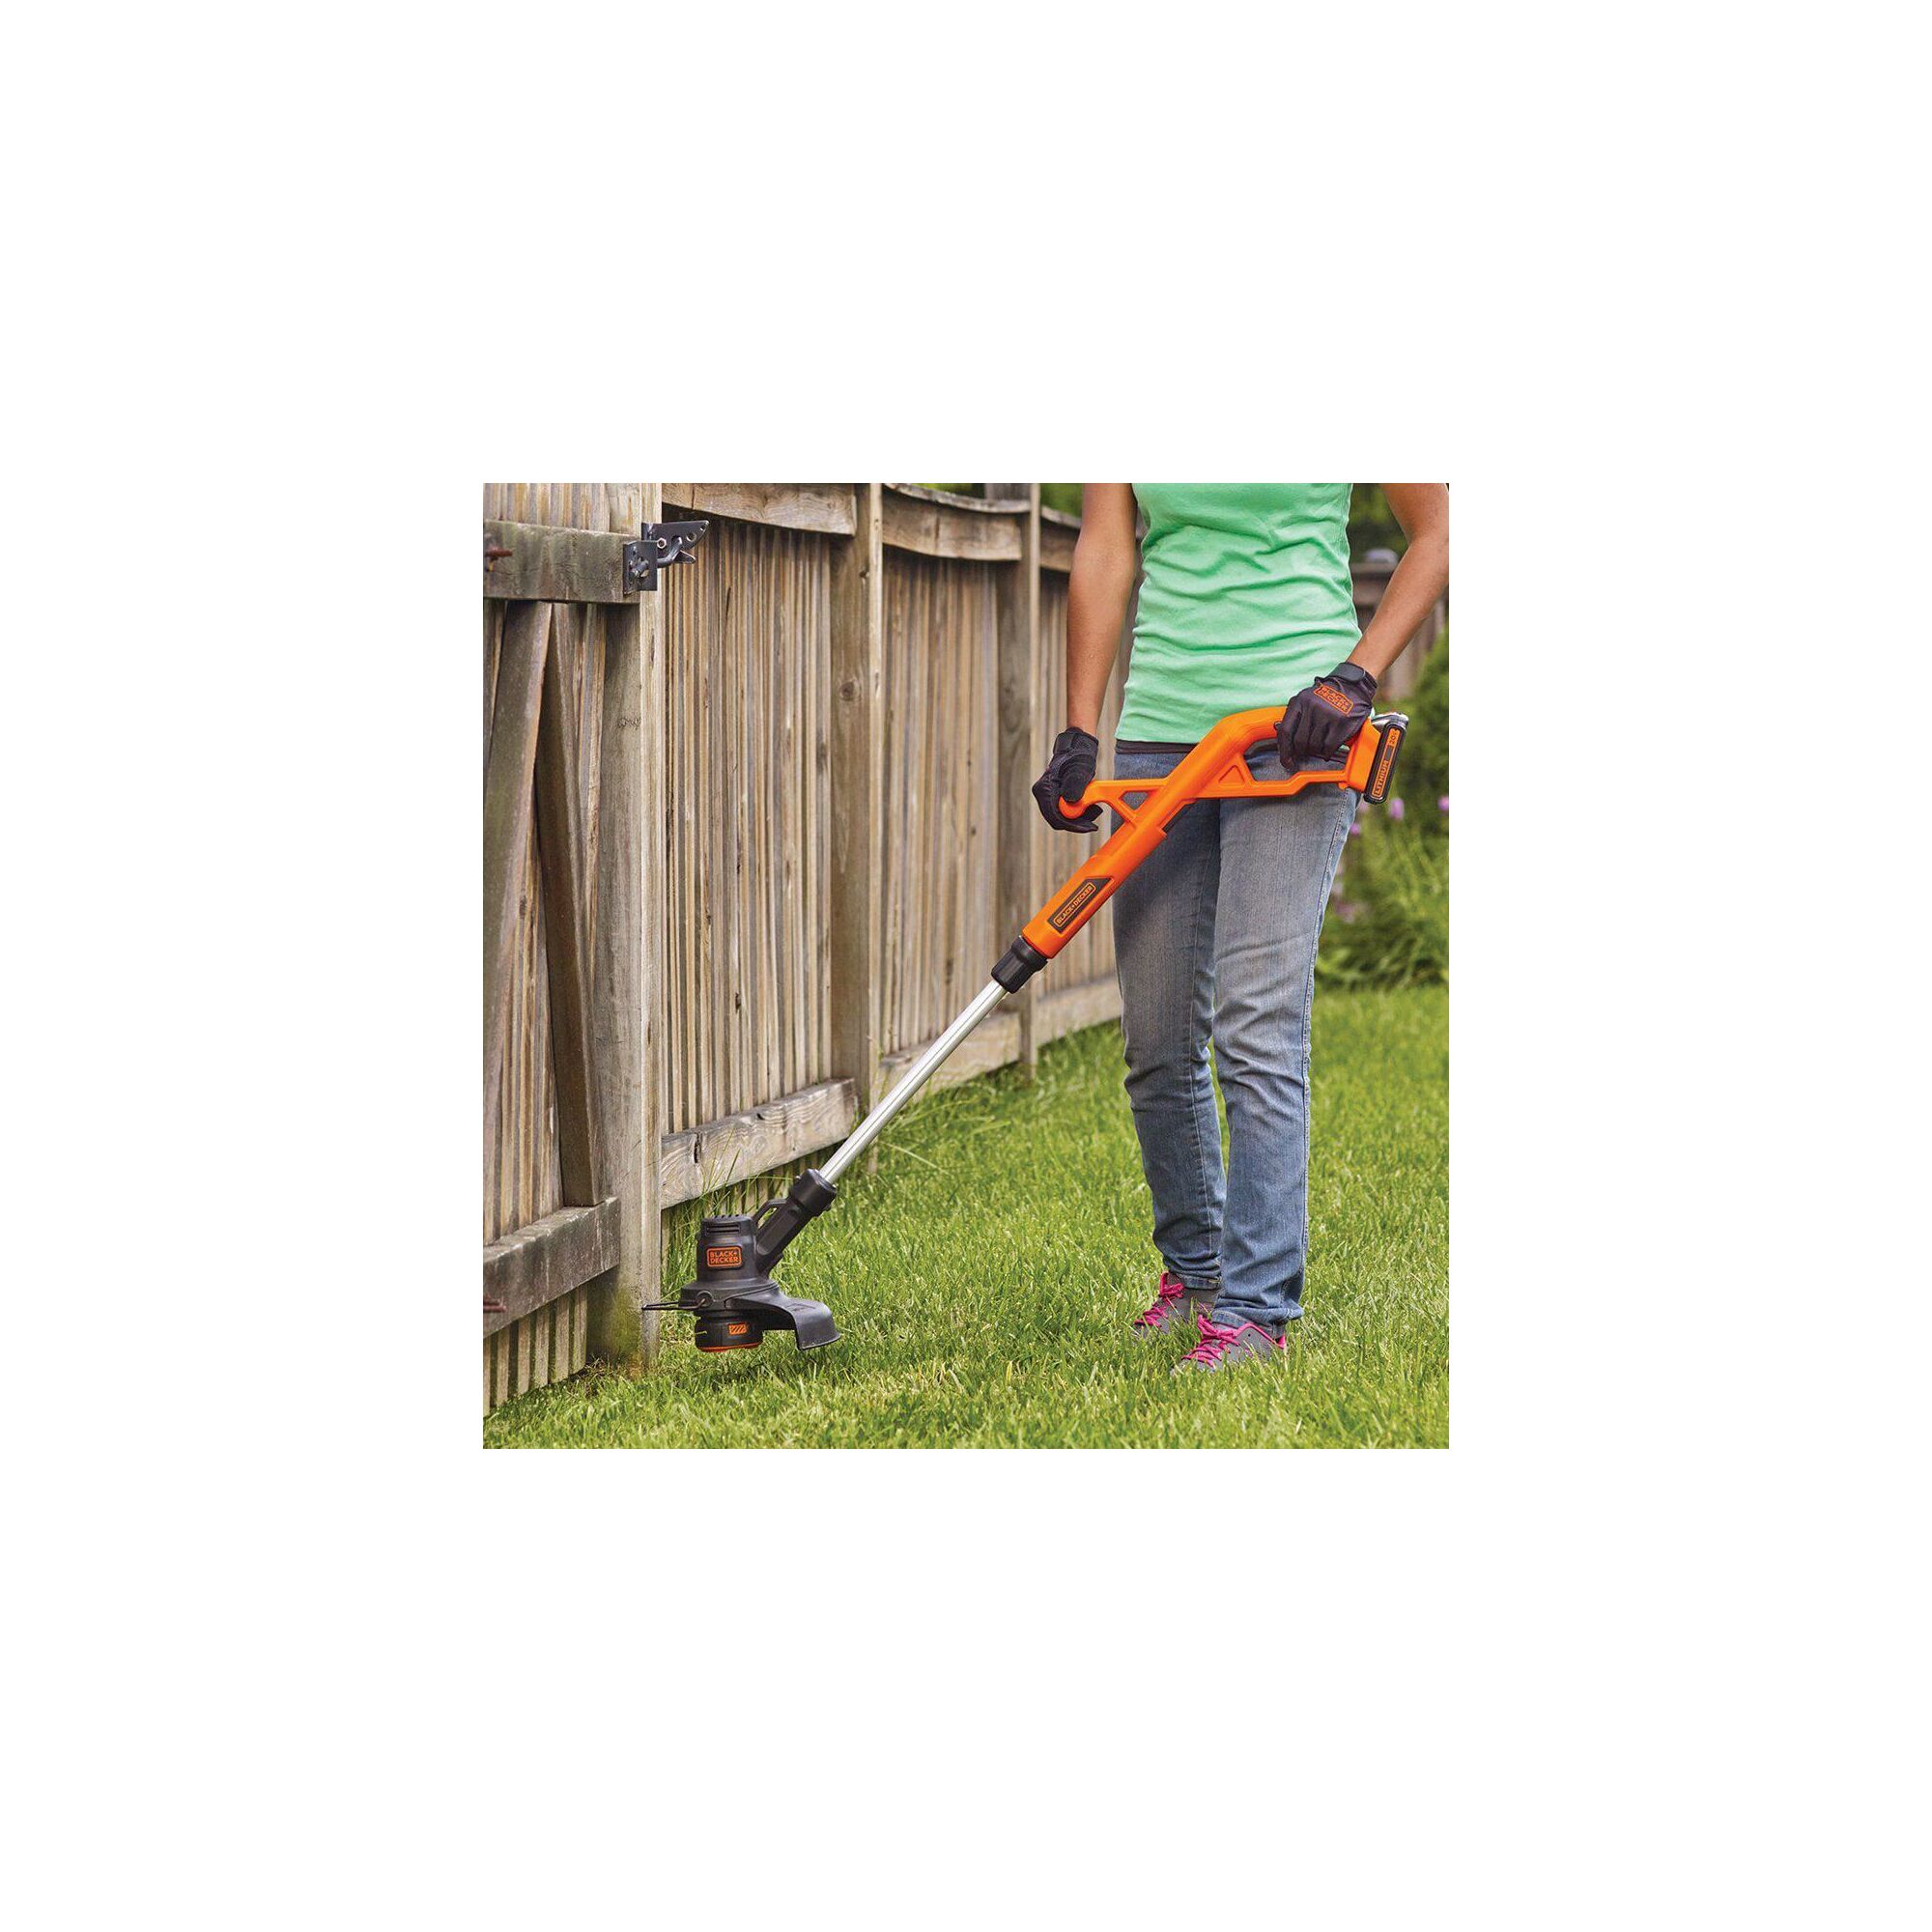 Person using string trimmer near wooden fence